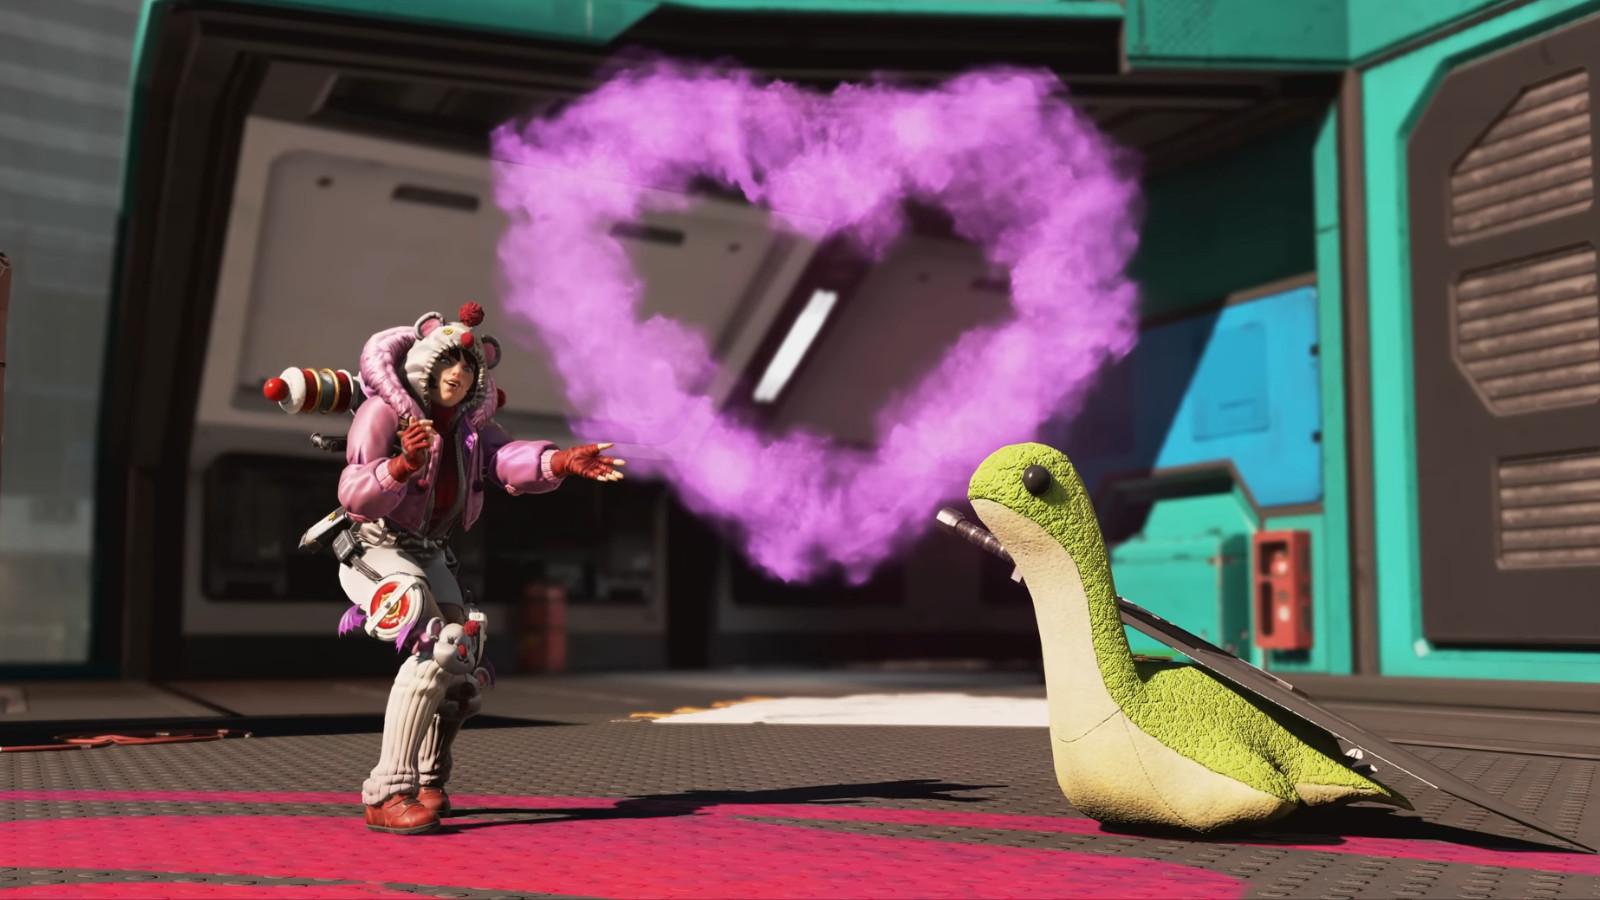 wattson and nessie in the apex legends ff7 crossover